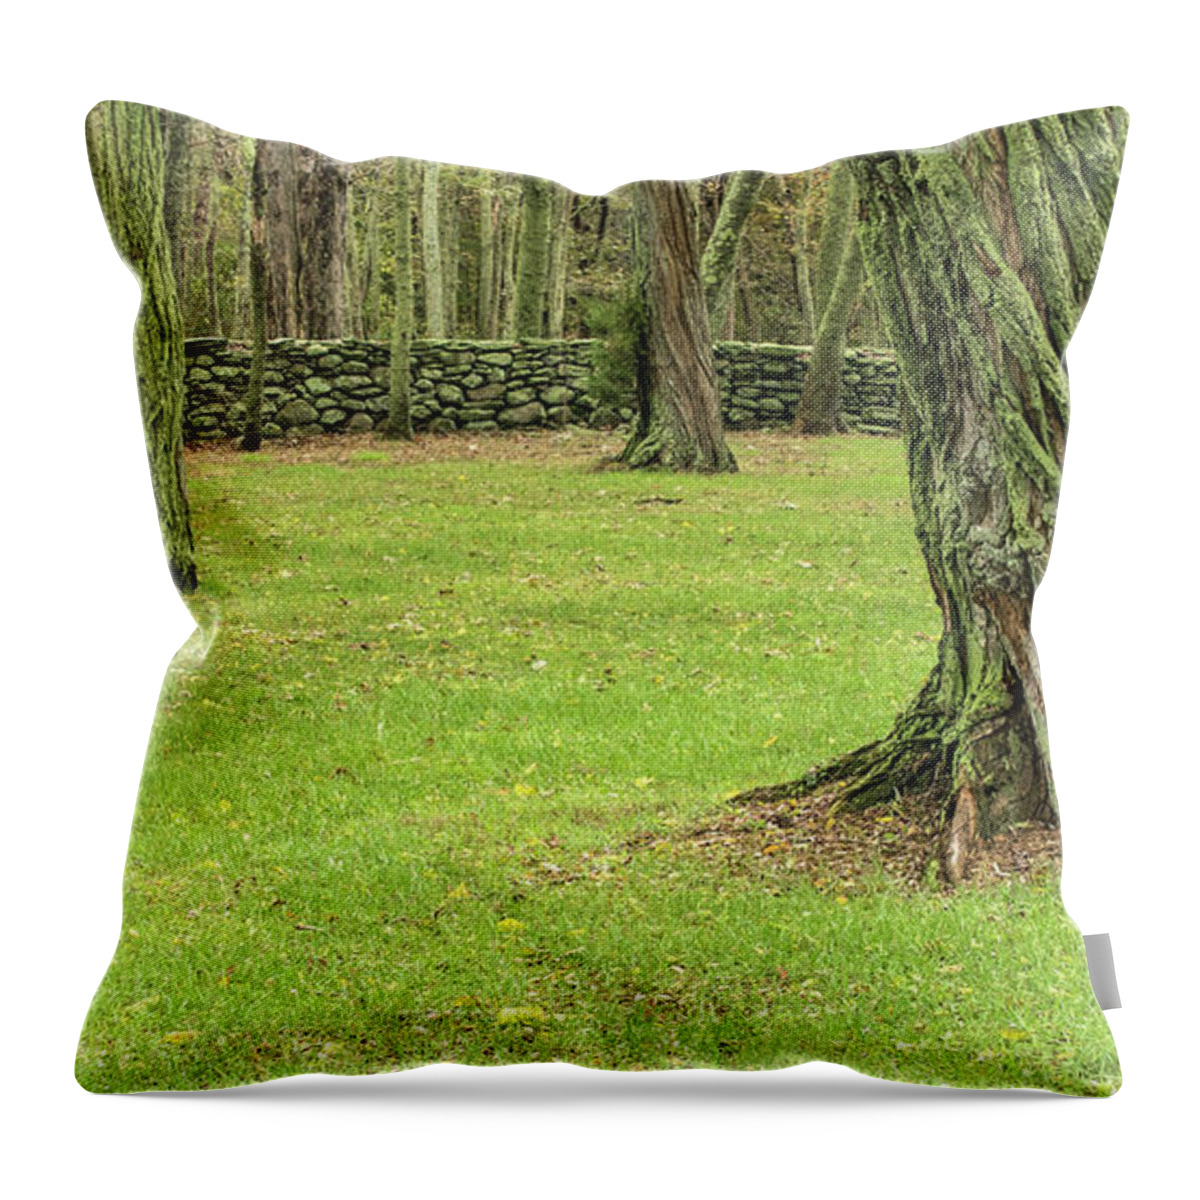 Stone Wall Throw Pillow featuring the photograph Venerable Trees and a Stone Wall by Nancy De Flon